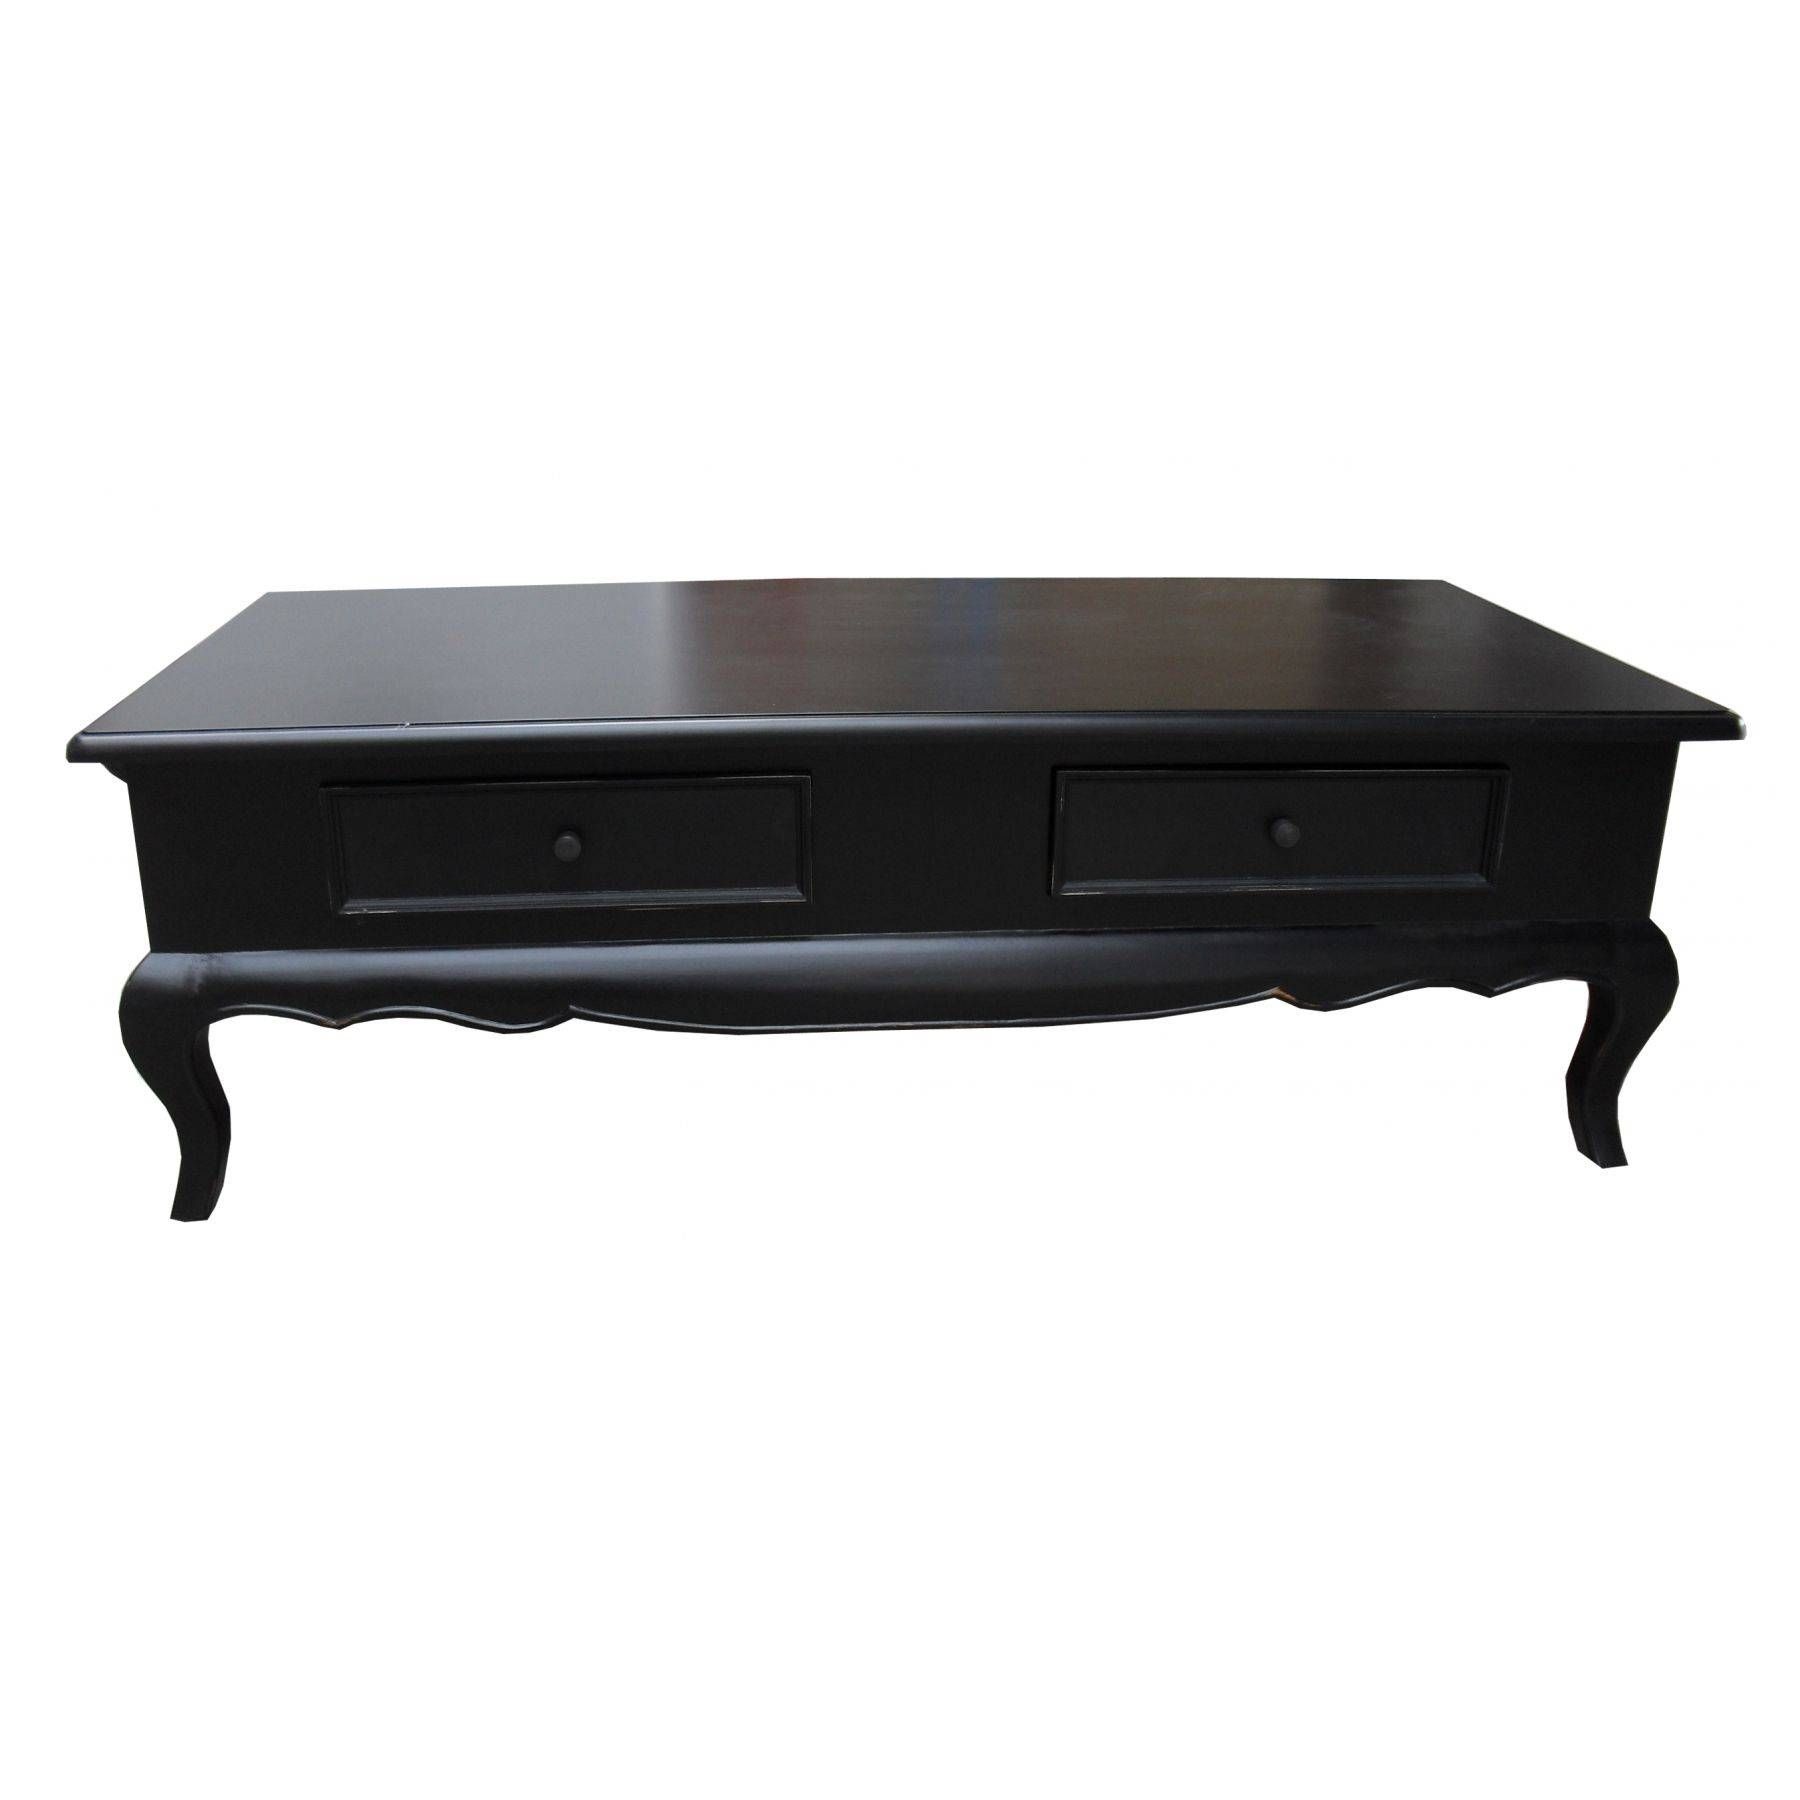 Antique Coffee Tables Intended For White Retro Coffee Tables (View 16 of 30)